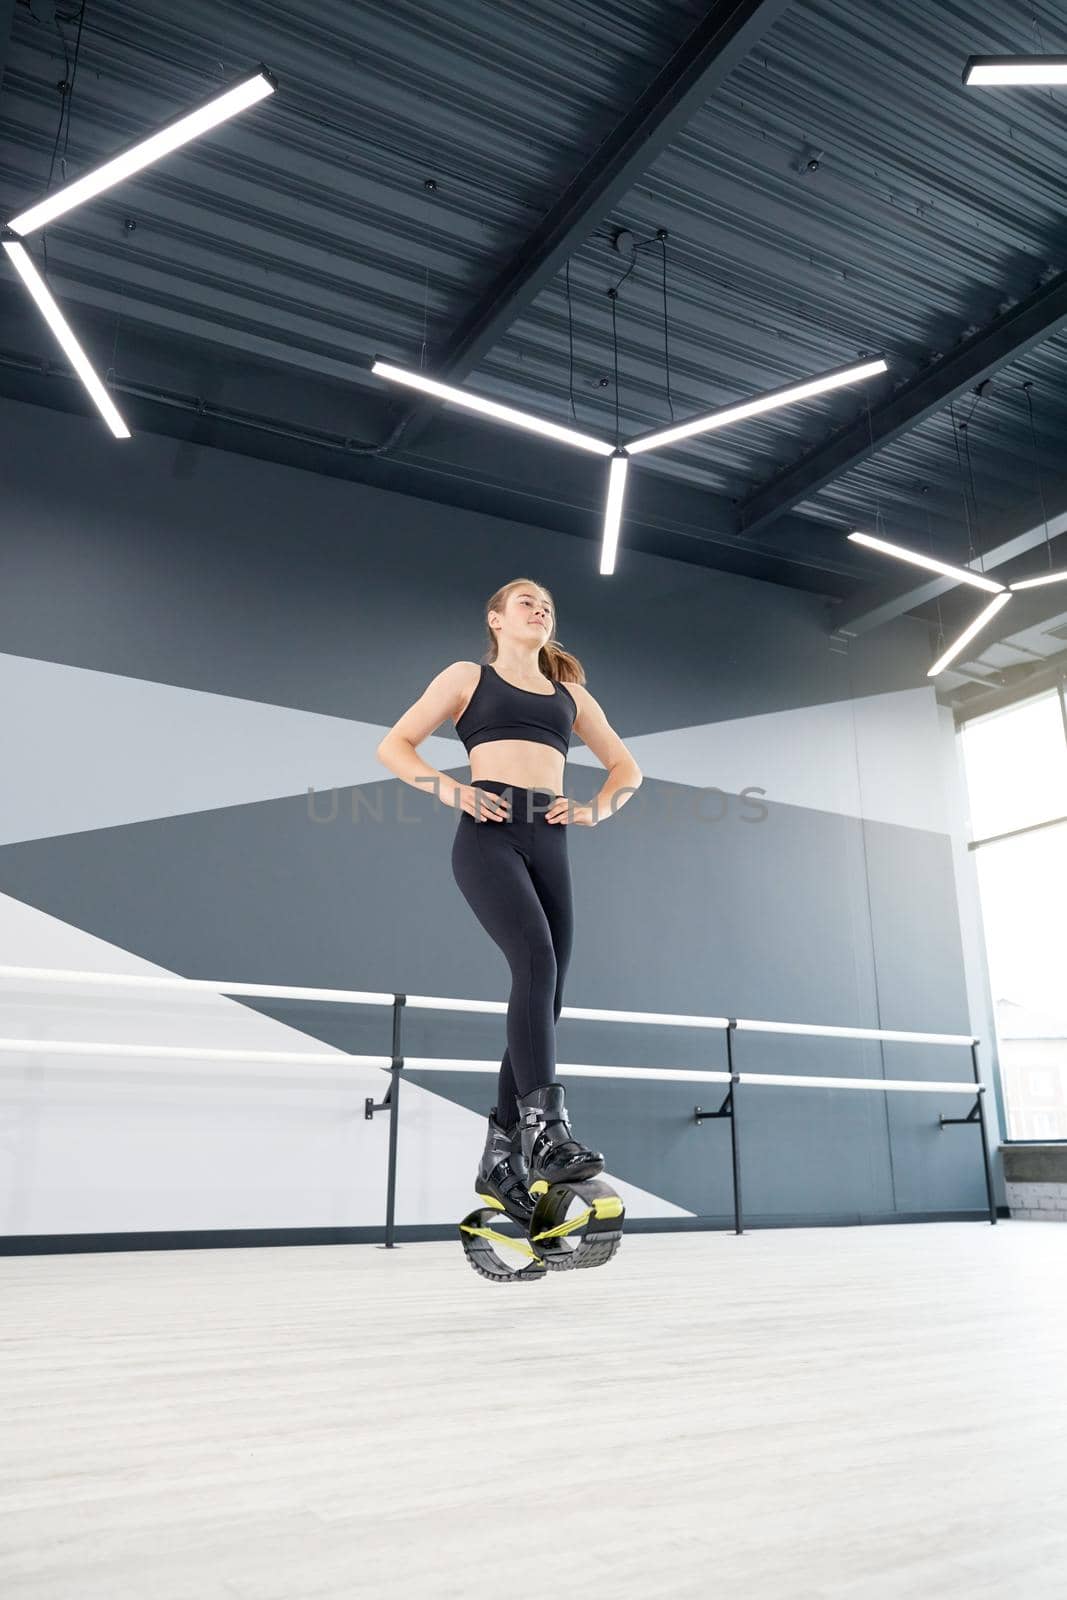 From below view of girl practicing dance moves while doing kangoo jumps, hands on waist. Young female athlete with ponytail wearing tight black sportswear, cardio exercise in hall, hi tech interior.